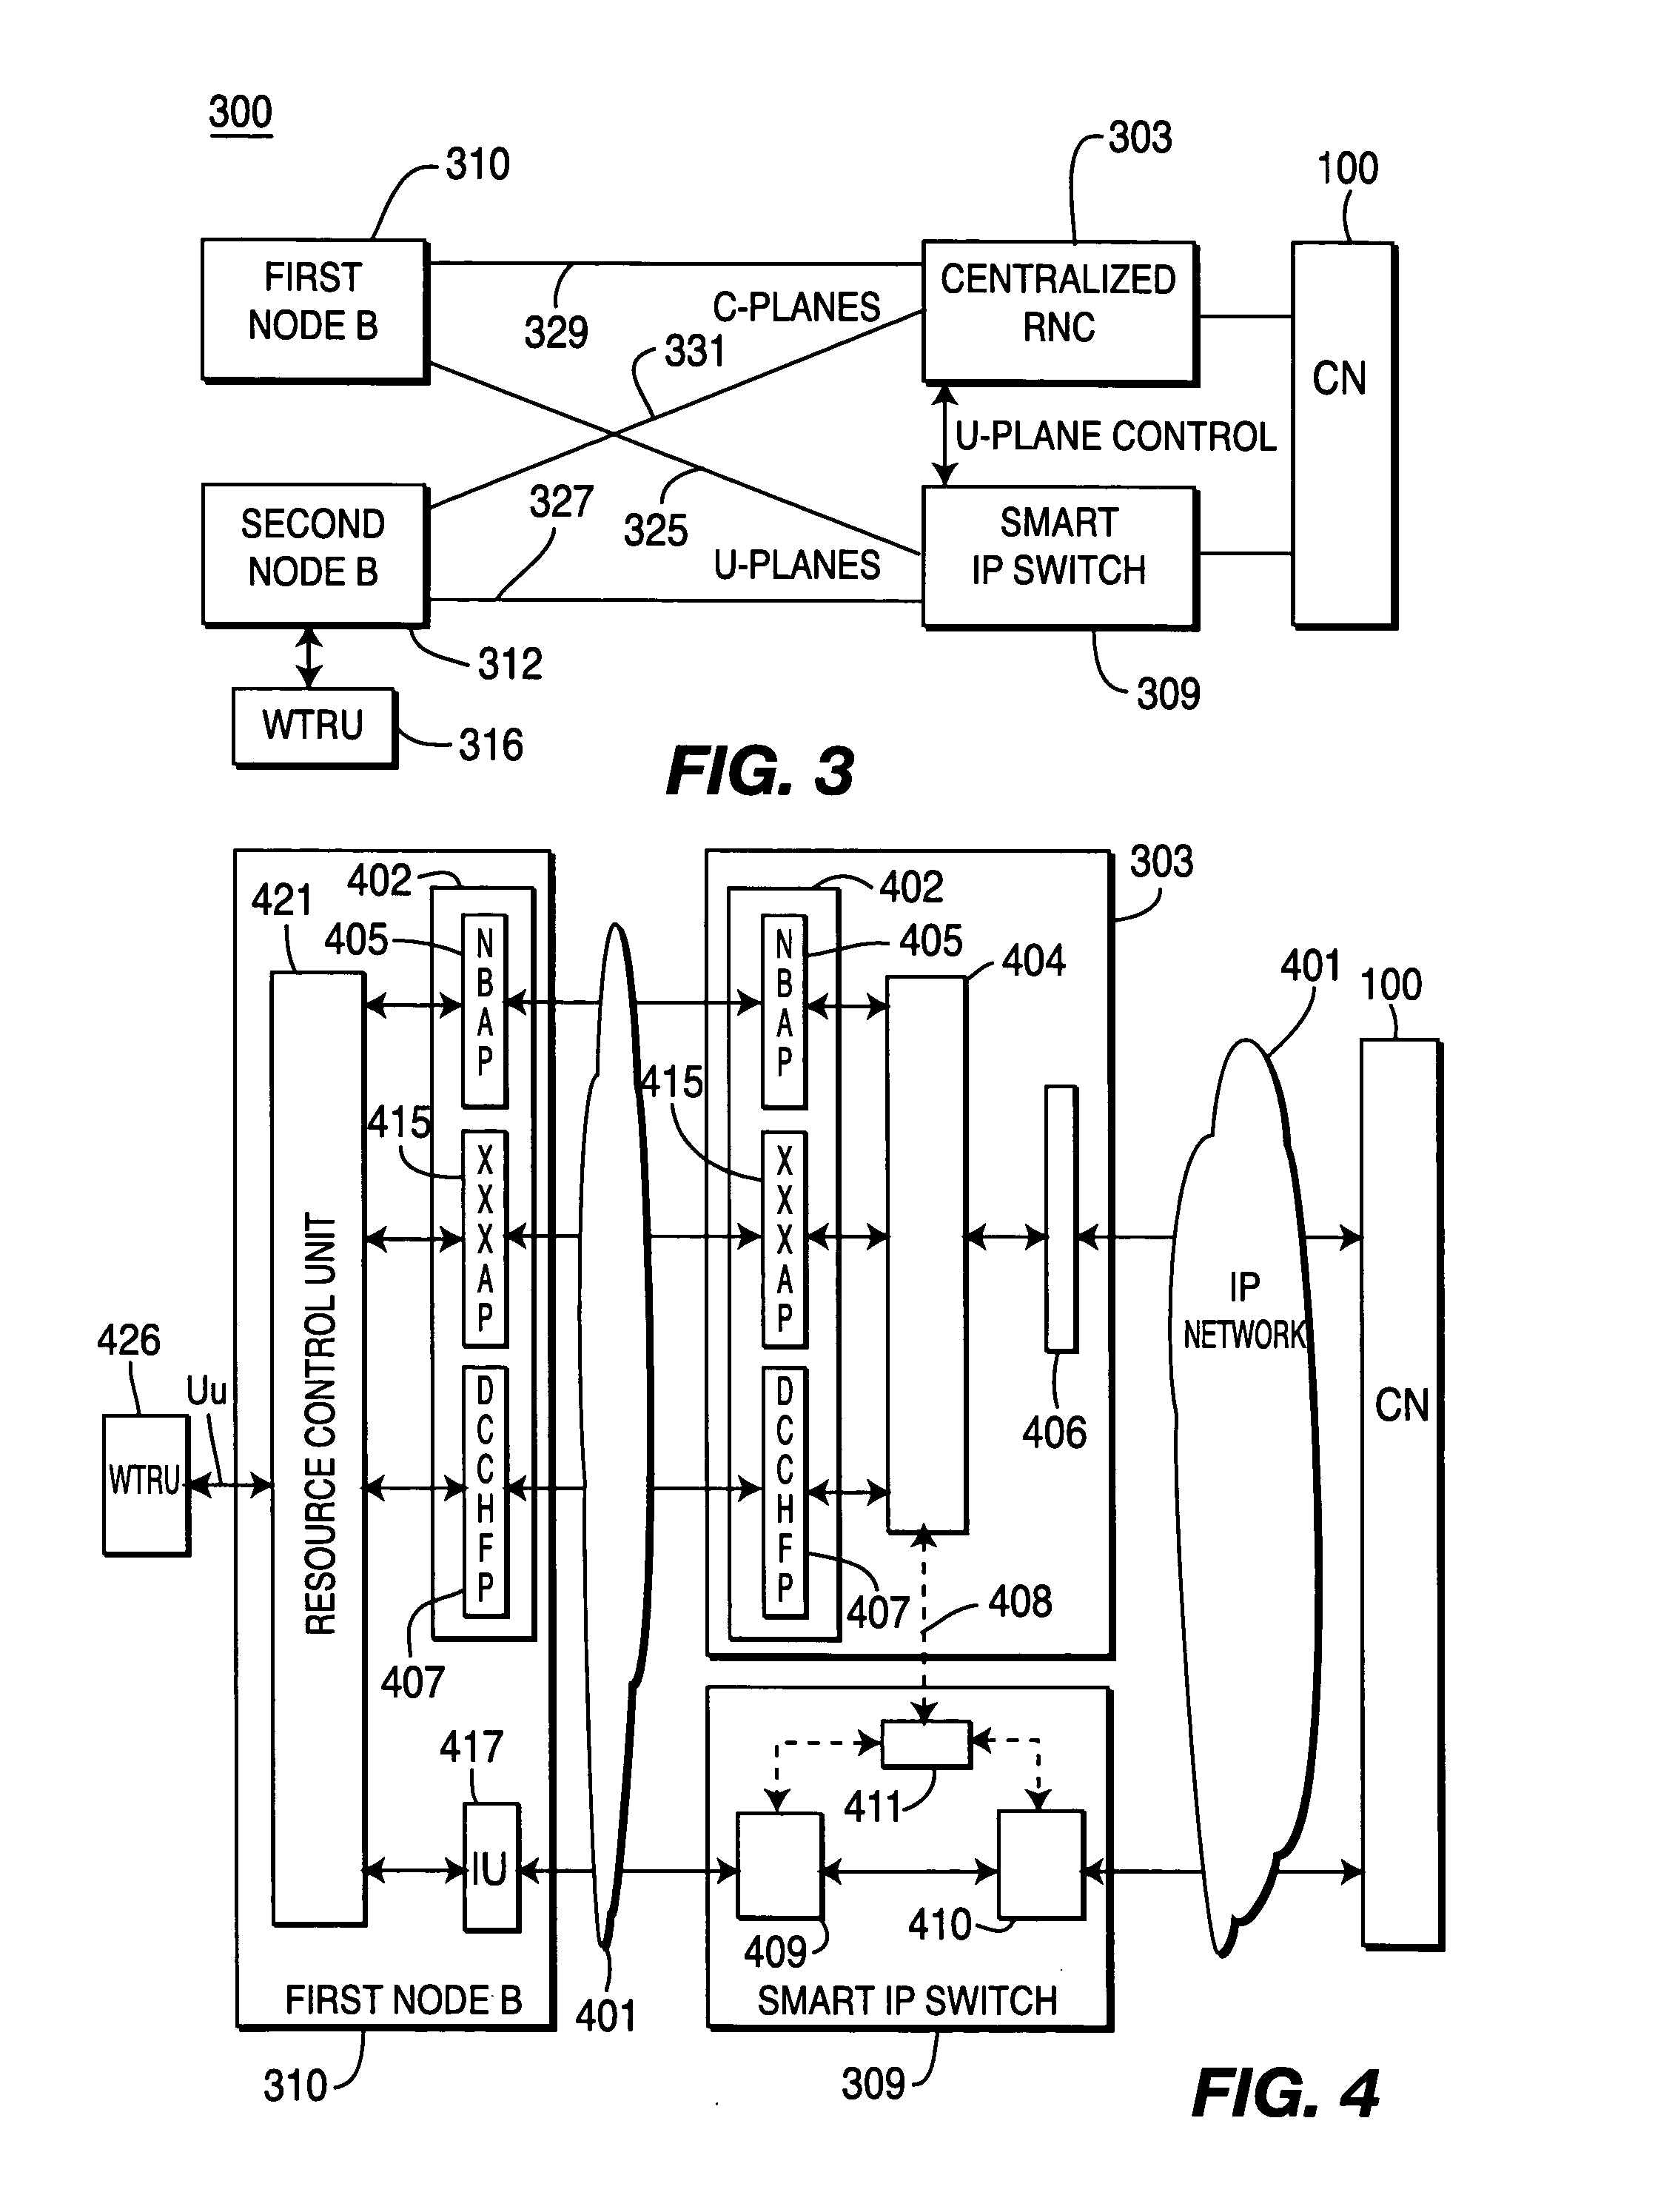 Centralized radio network controller